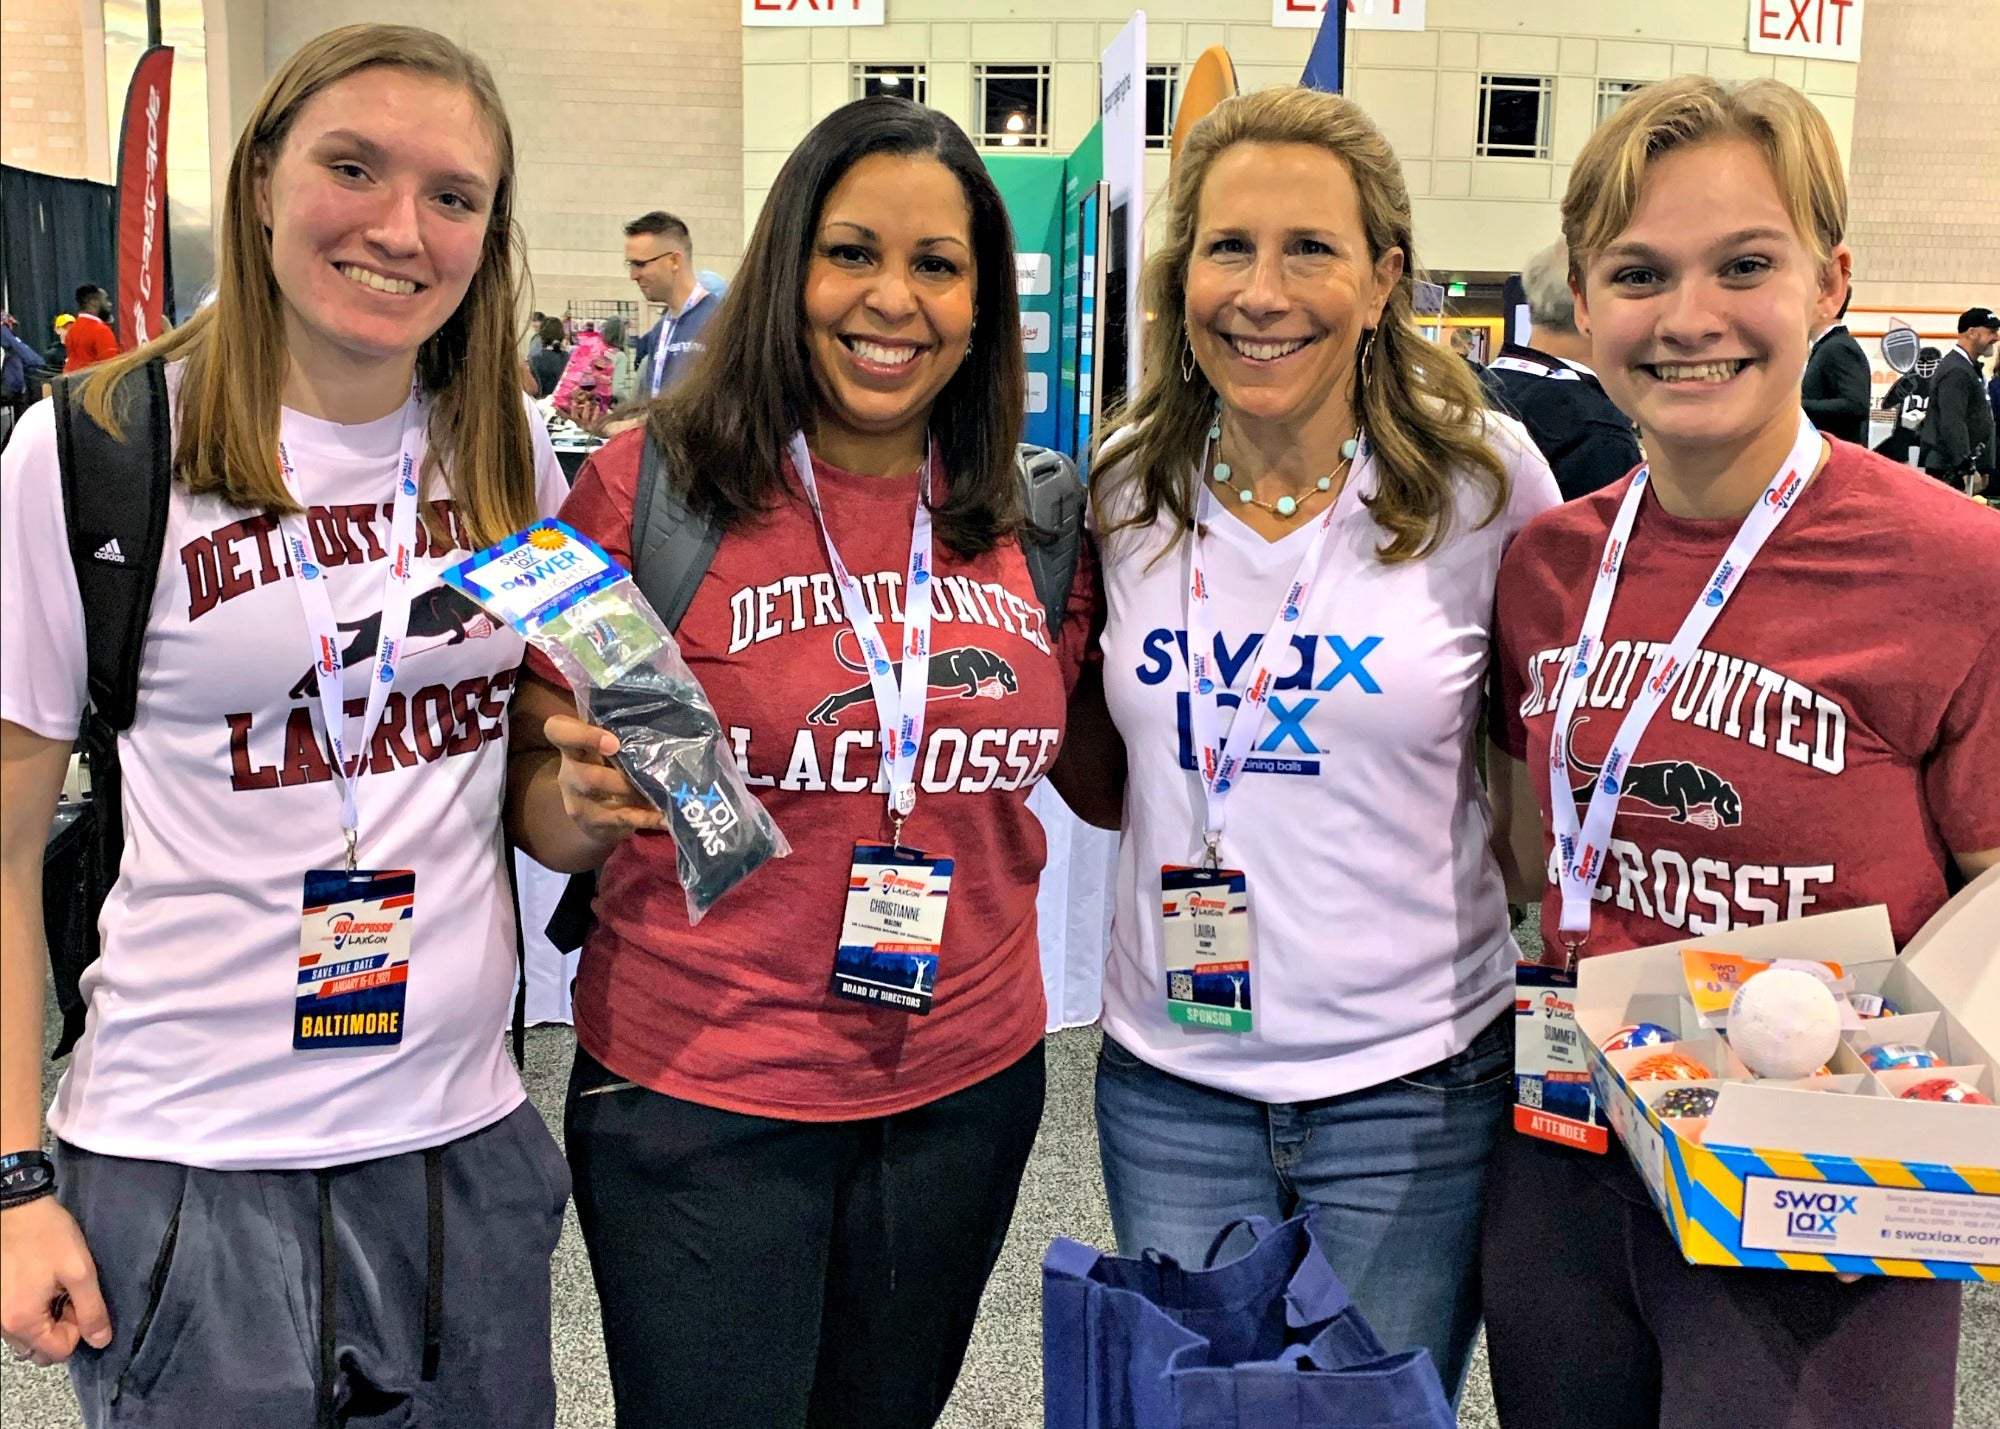 Christianne - winner of our Saturday 2020 LaxCon Swax Lax giveaway bundle